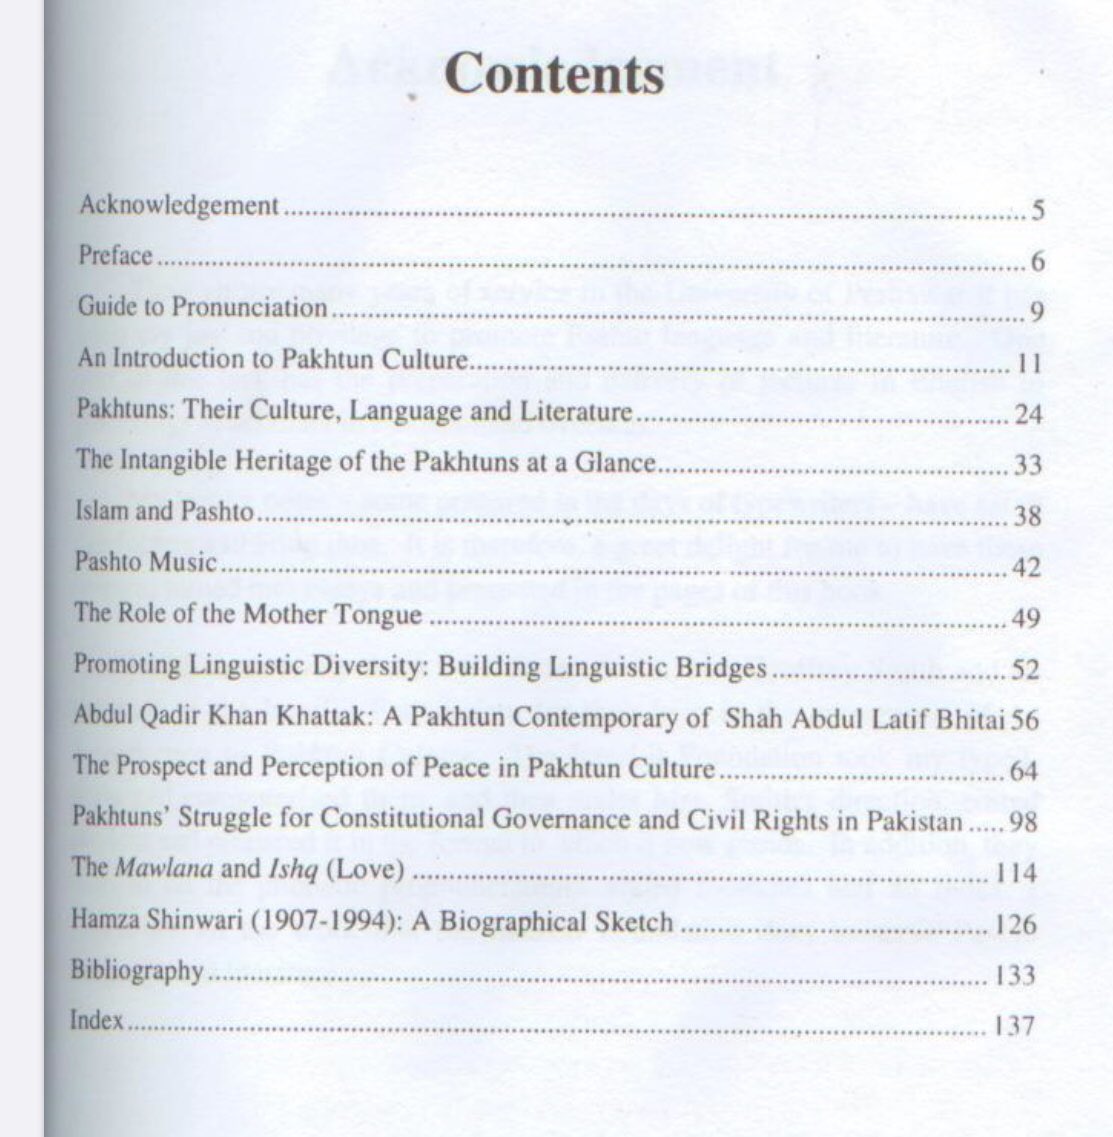 5 - Instead of stereotyped canard half-baked trash , actual facts should be included in Single National Curriculum “An Introduction of Pakhtun Culture by Dr Raj Wali Shah Khattak”  https://ia801301.us.archive.org/14/items/194097011IntroductionToPashtunCulture/194097011-Introduction-to-Pashtun-Culture.pdf -  #AikNisab  #SNC  @mazdaki  @a_siab  @gabeeno  @BushraGohar  @FarhatullahB